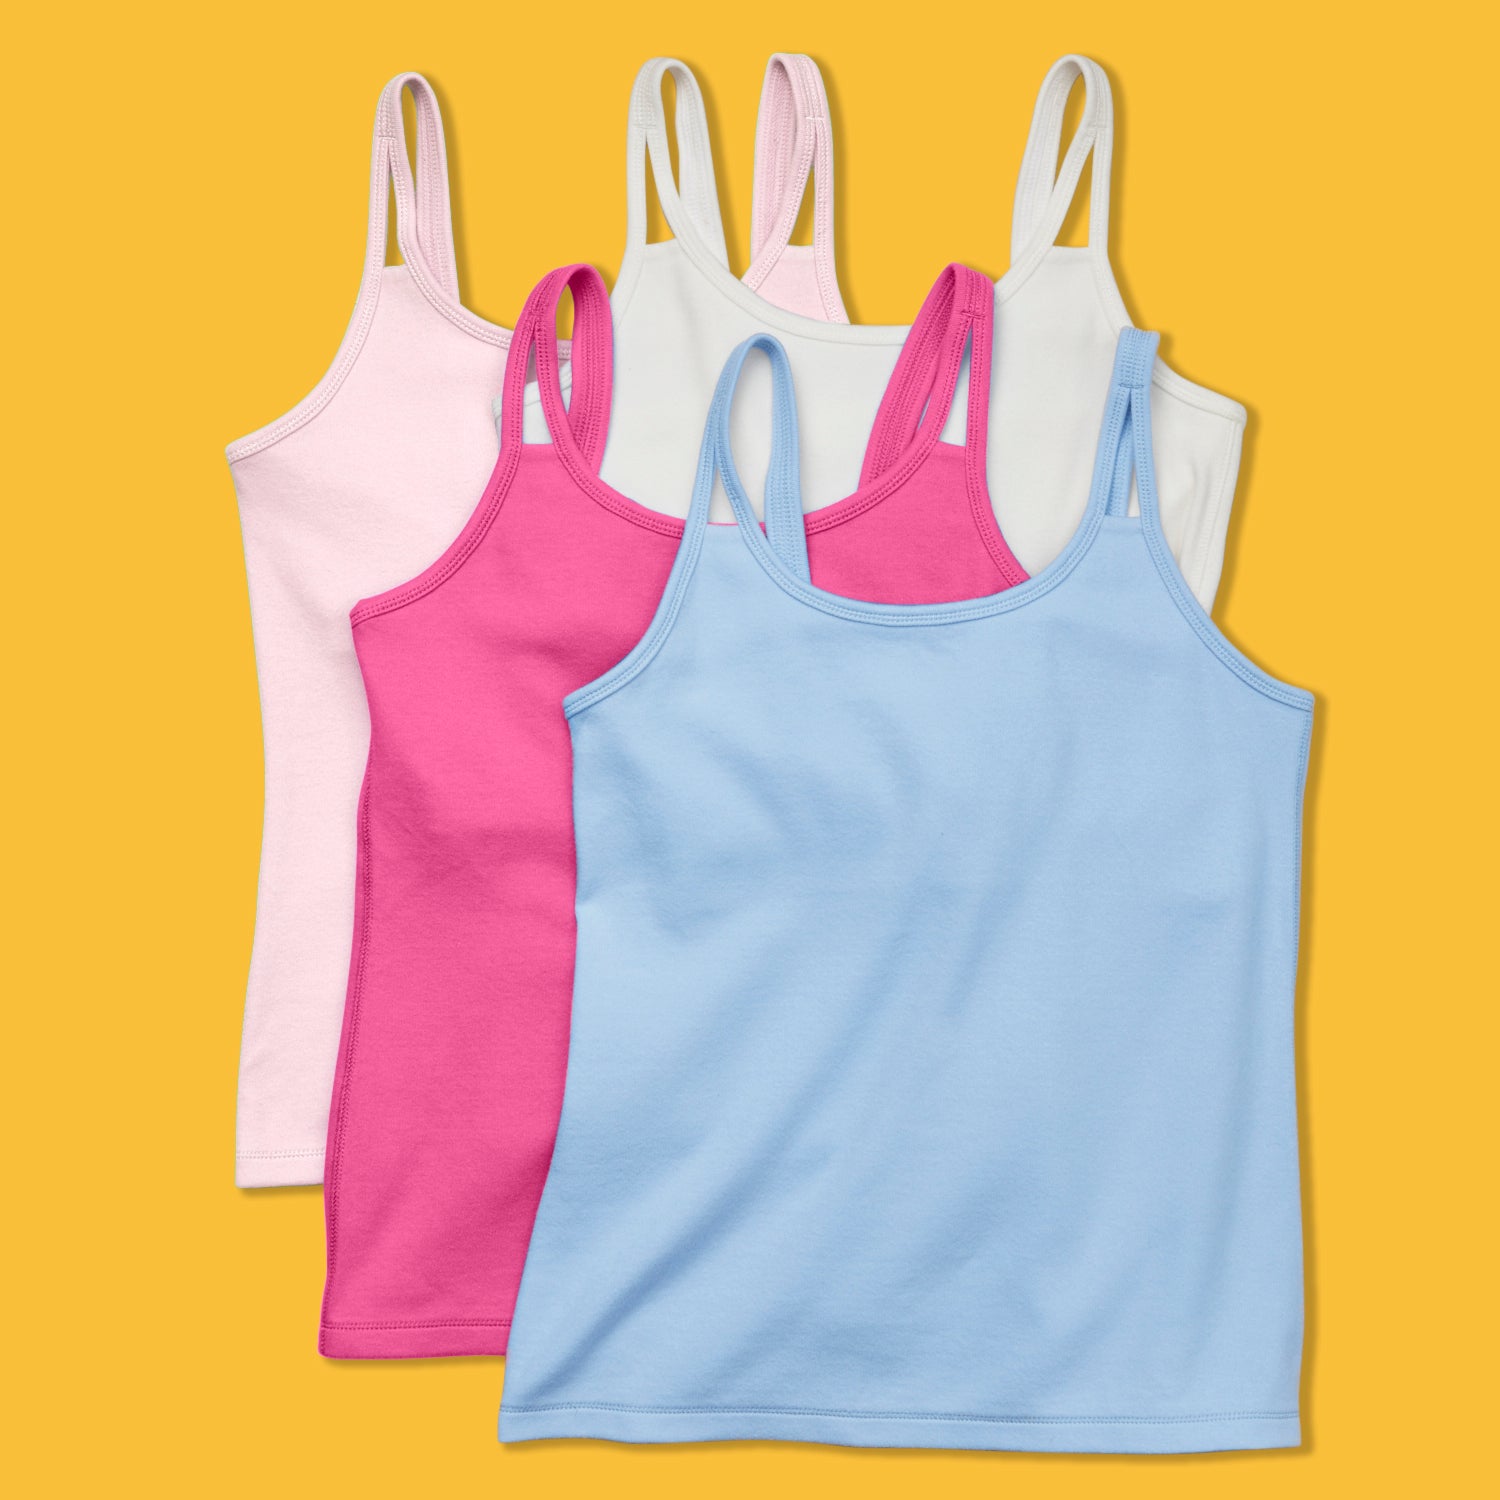 Girl's Camisoles and Tops - Yellowberry